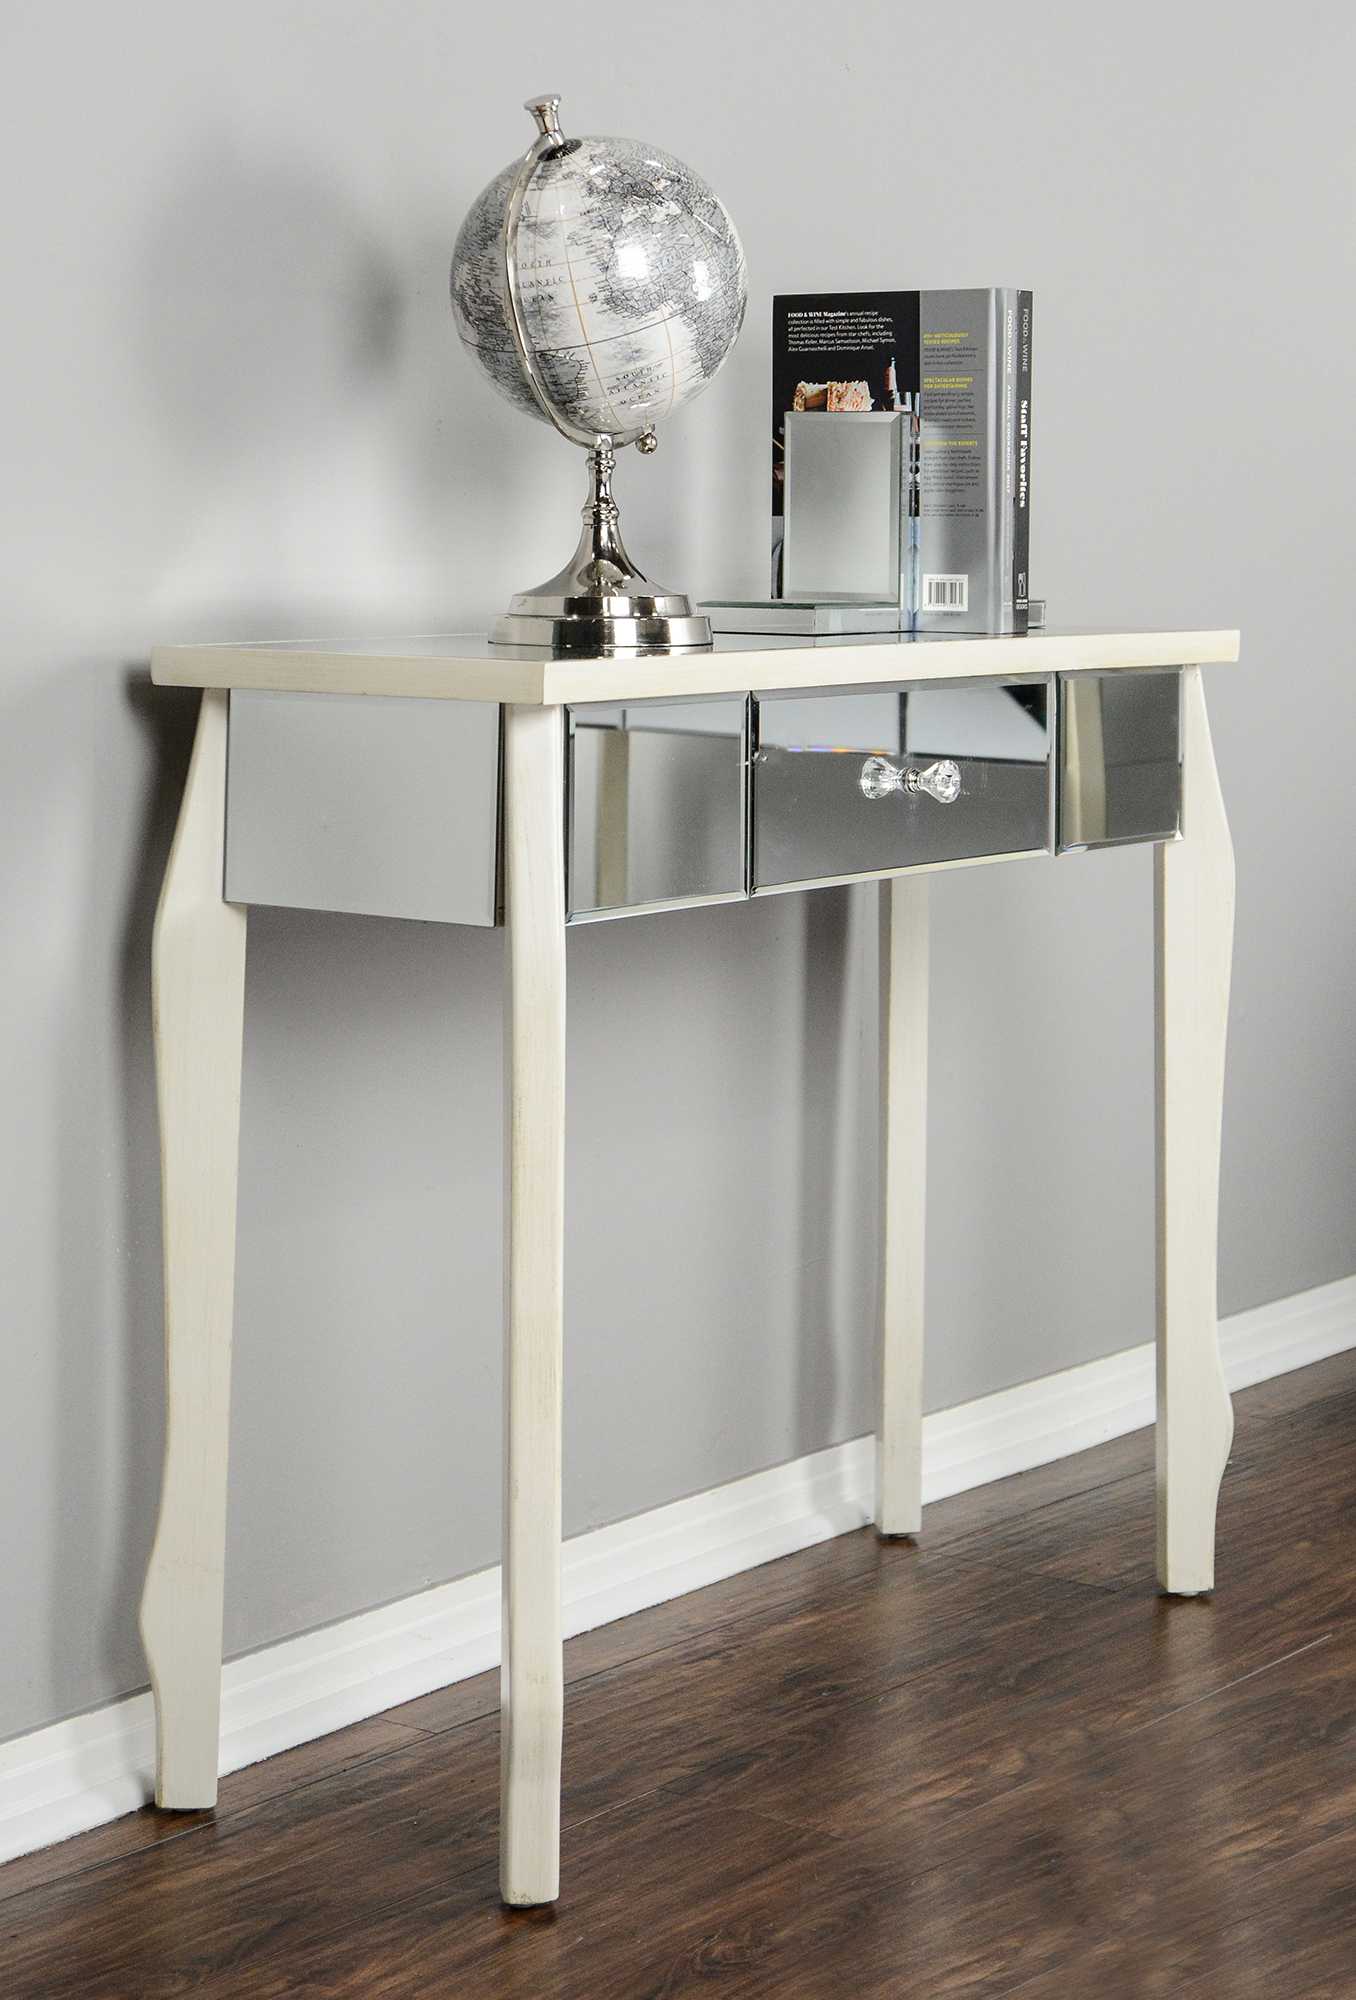 35.5" X 13" X 31" Antique White MDF Wood Mirrored Glass Console Table with Mirrored Glass Inserts and a Drawer